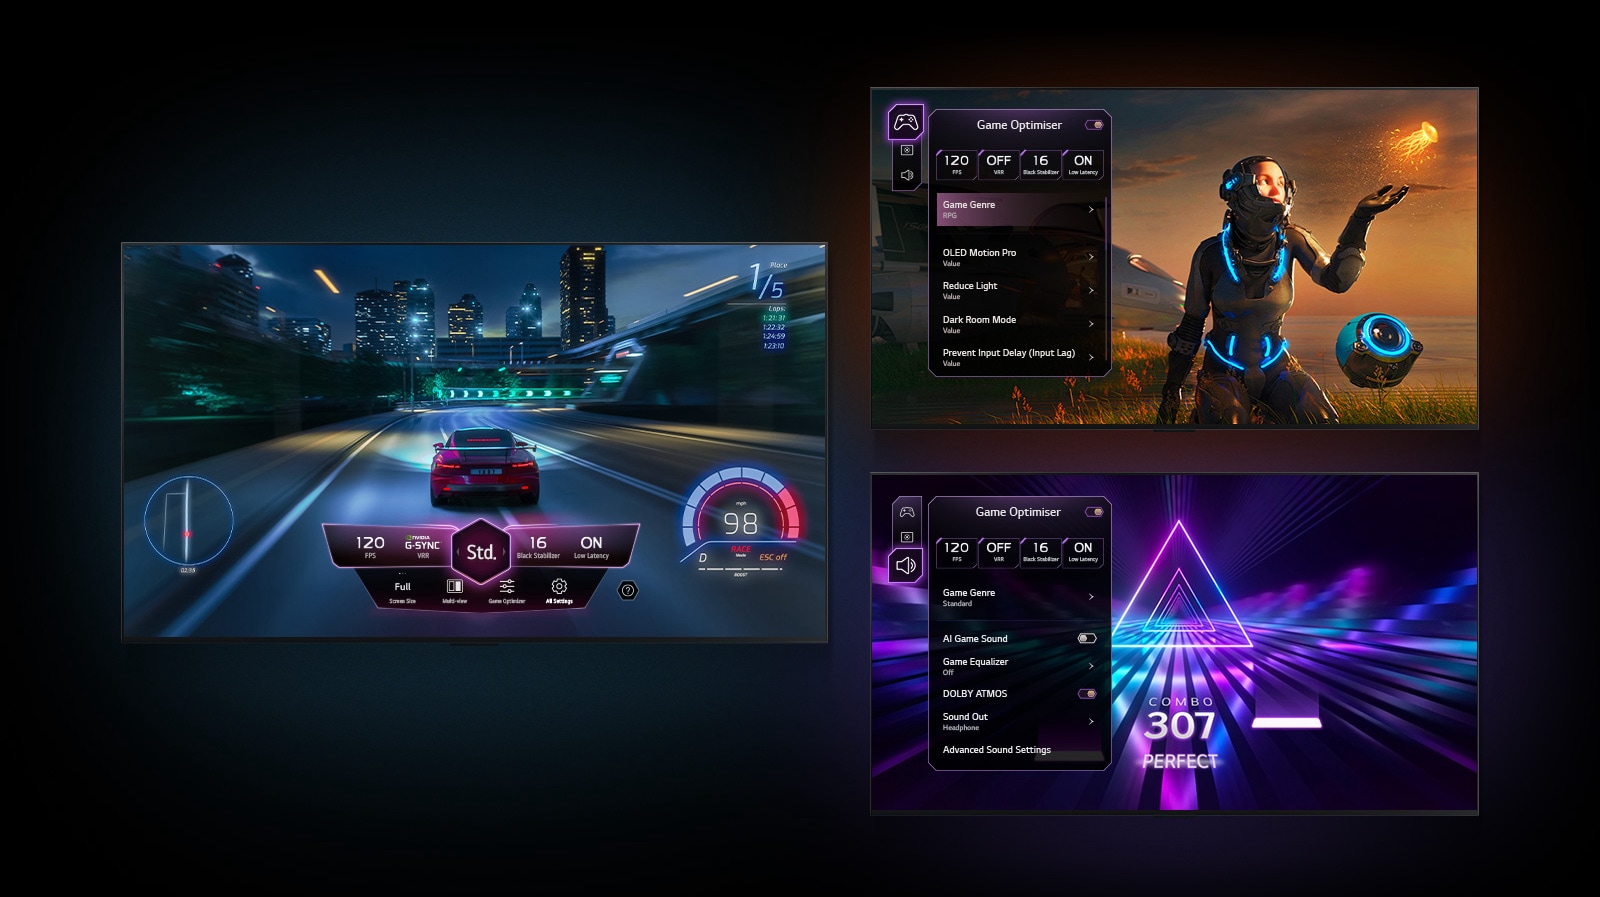 Three game screens are shown against a black gradient background. One shows a car racing game with the Game Dashboard hovering over the action. Another shows a Sci-Fi game with the Game Optimizer menu. And the last screen shows Game Optimizer's Game Tab over a music game.